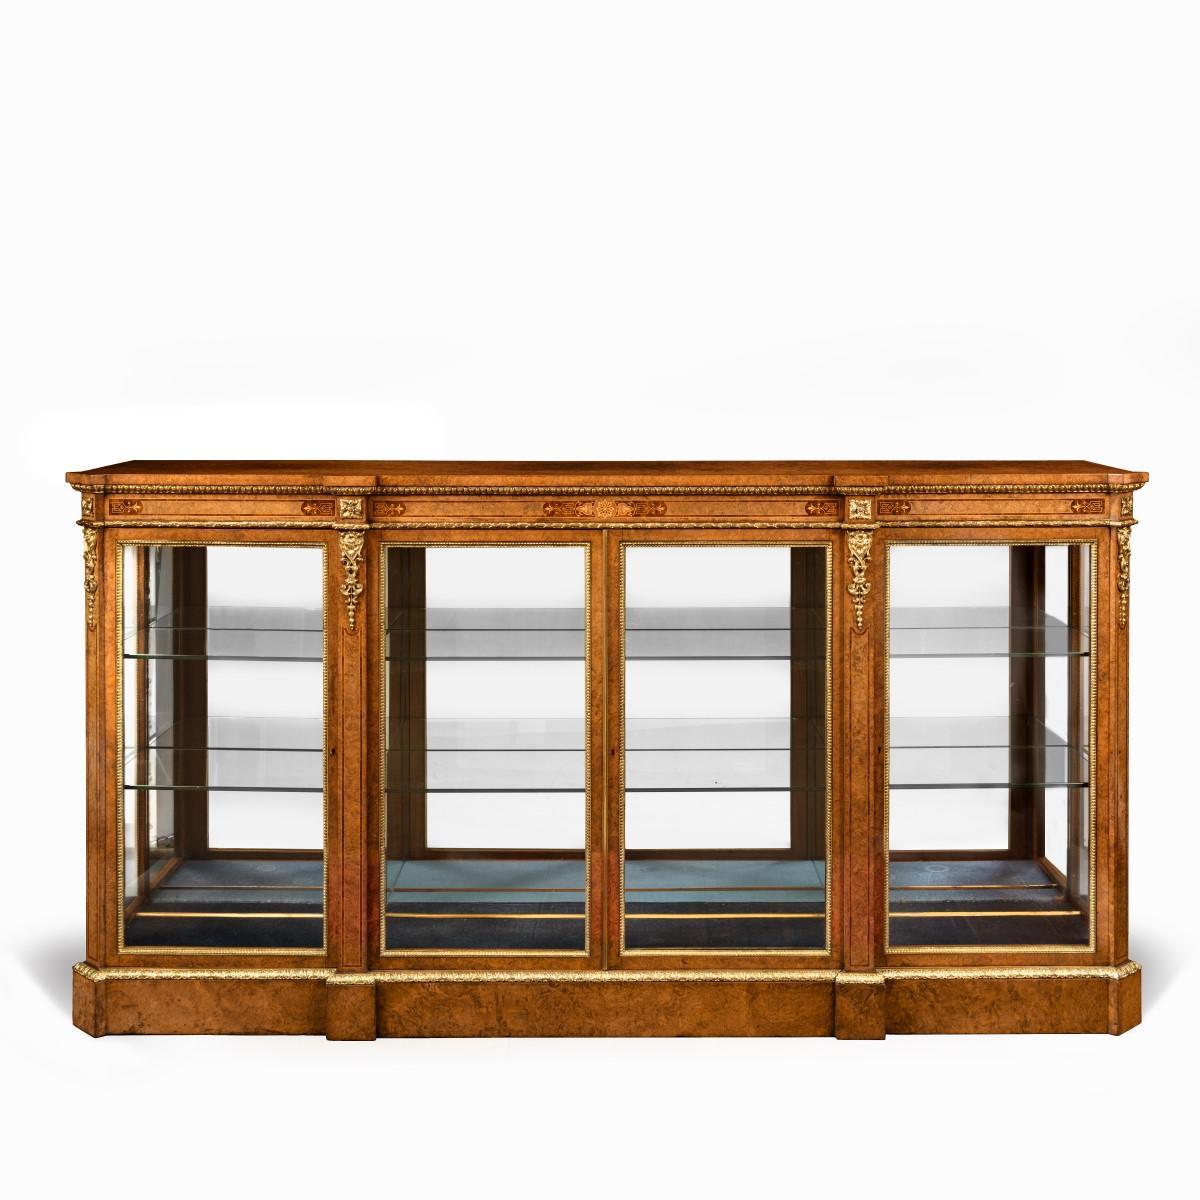 A mid Victorian burr walnut display cabinet, of rectangular breakfront form, with four glazed doors and sides, mirror-backed with two adjustable glass shelves, decorated with delicate boxwood and thoya inlays and fine quality ormolu mounts. English,